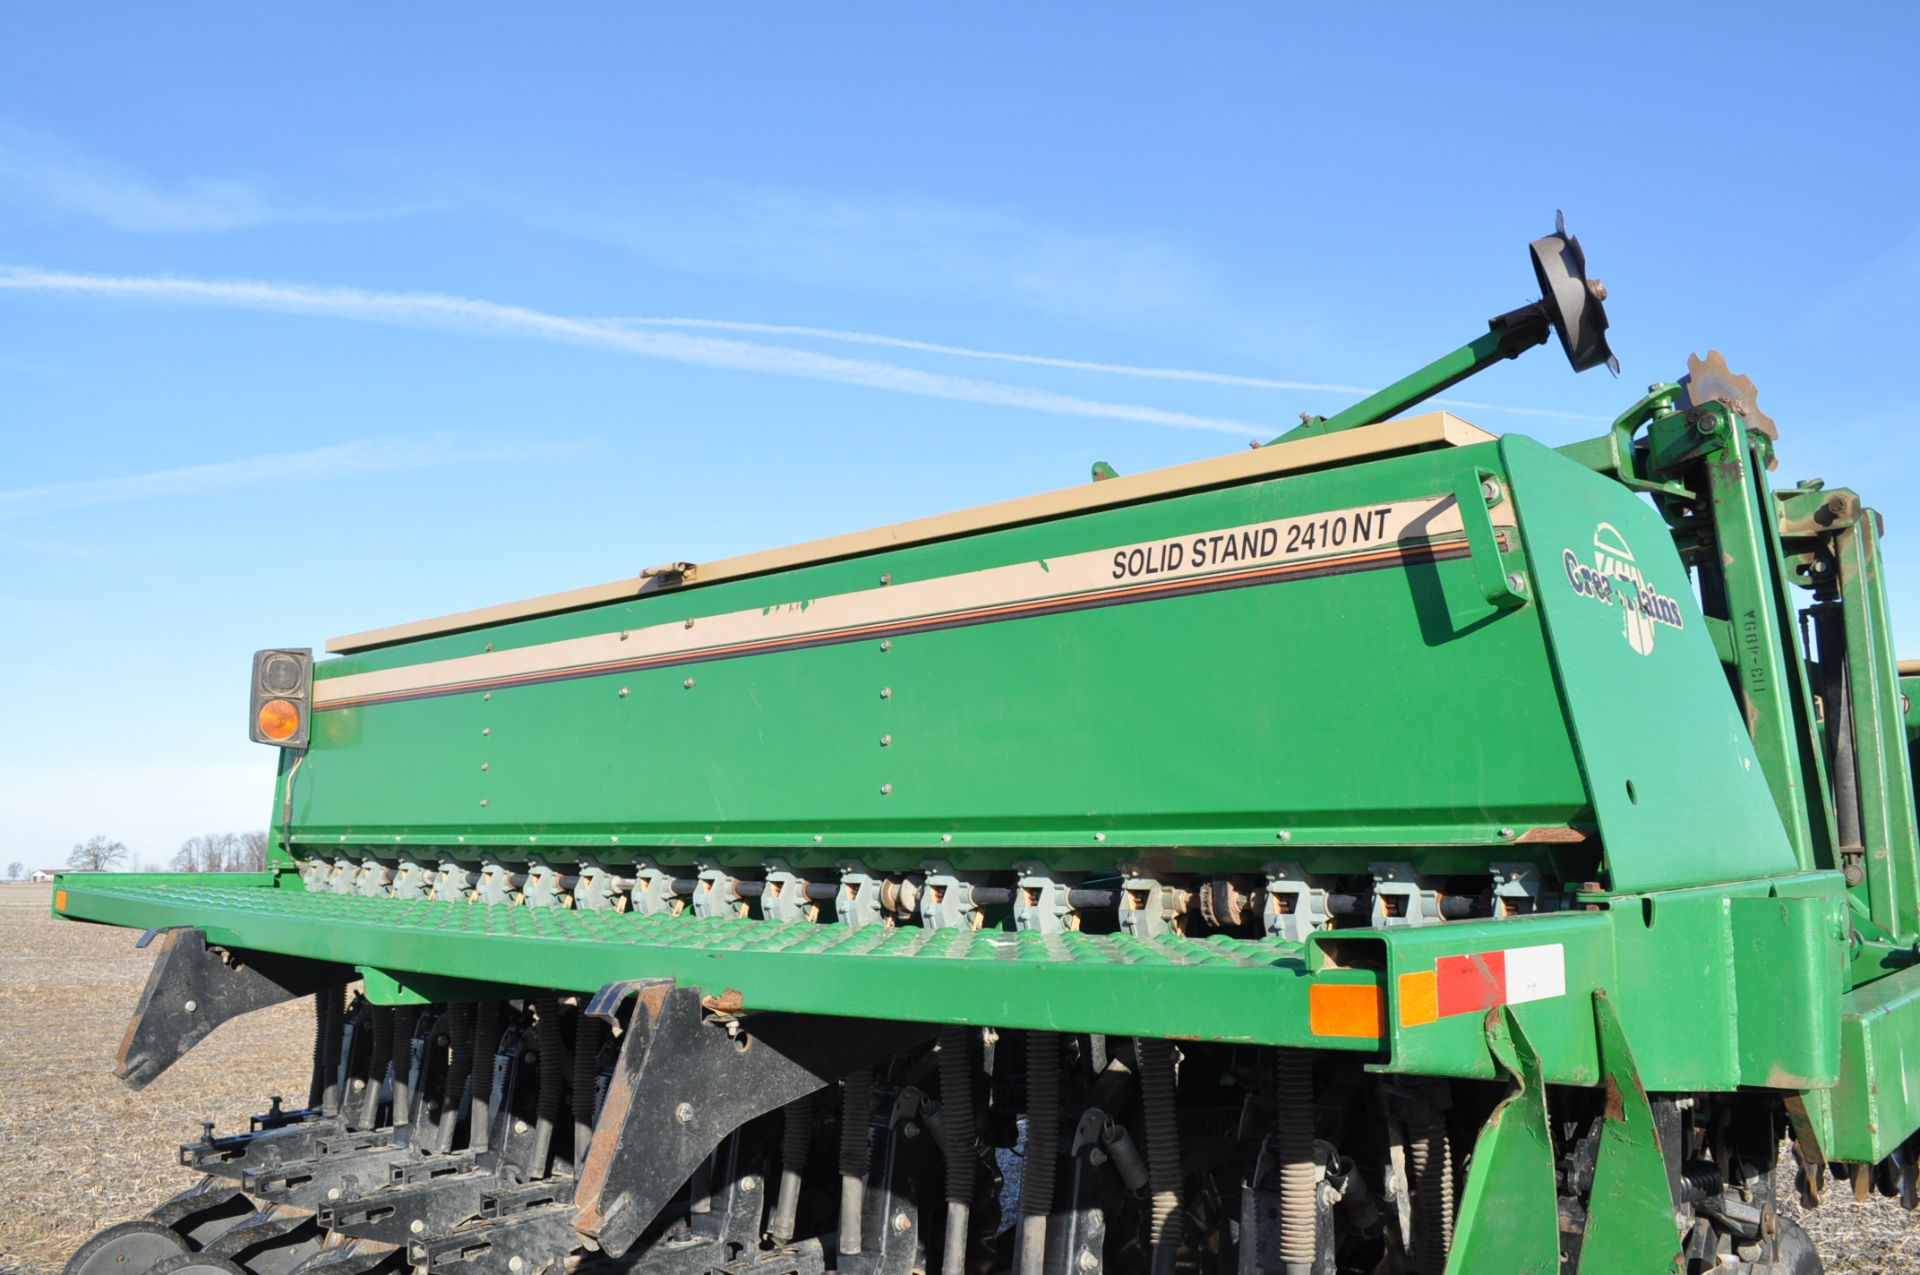 24’ Great Plains Solid Stand 2410NT drill, no-till coulters, seed loc wheel, single rubber press - Image 16 of 17